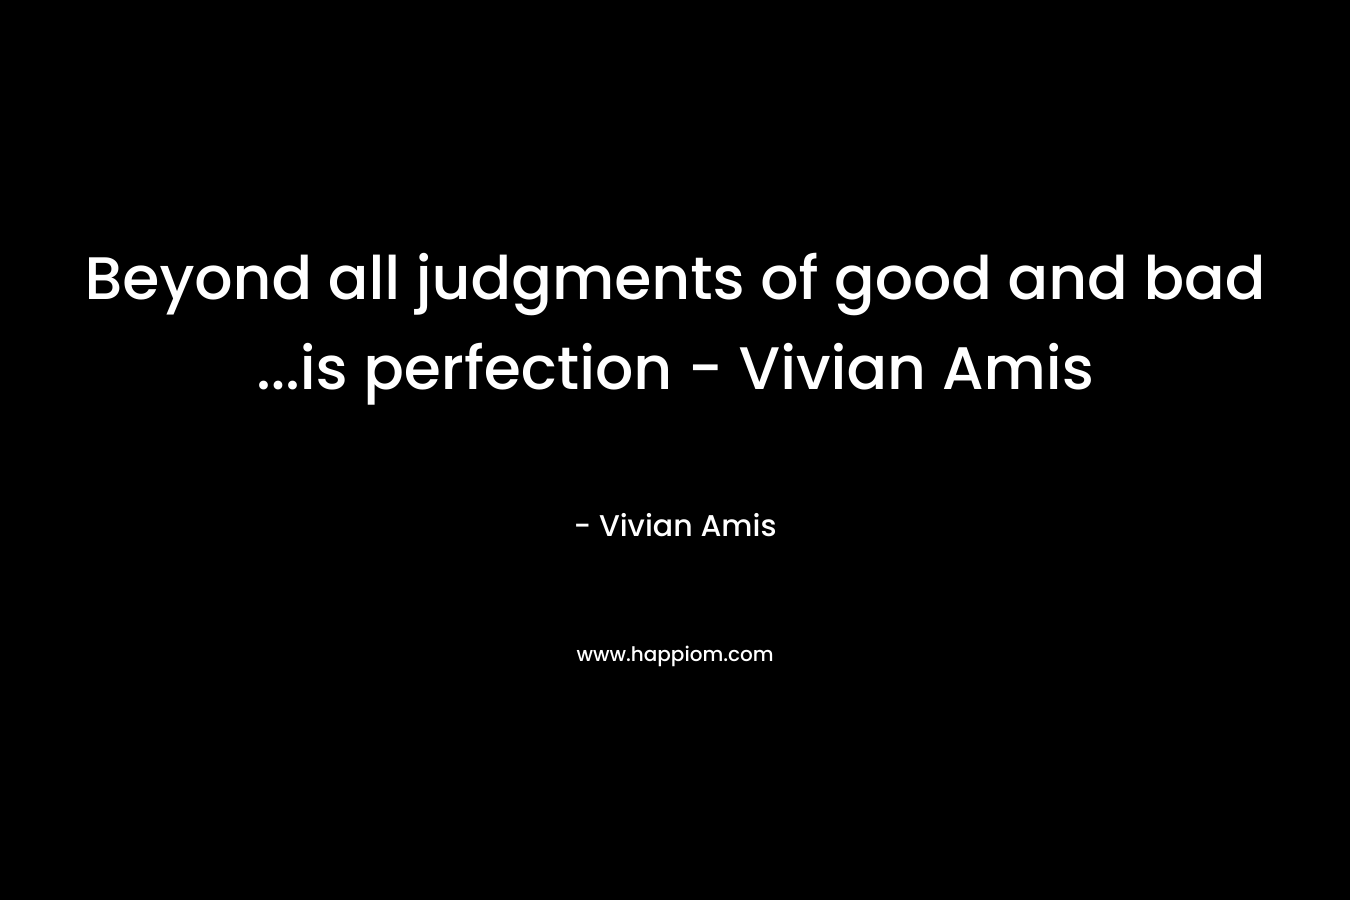 Beyond all judgments of good and bad ...is perfection - Vivian Amis